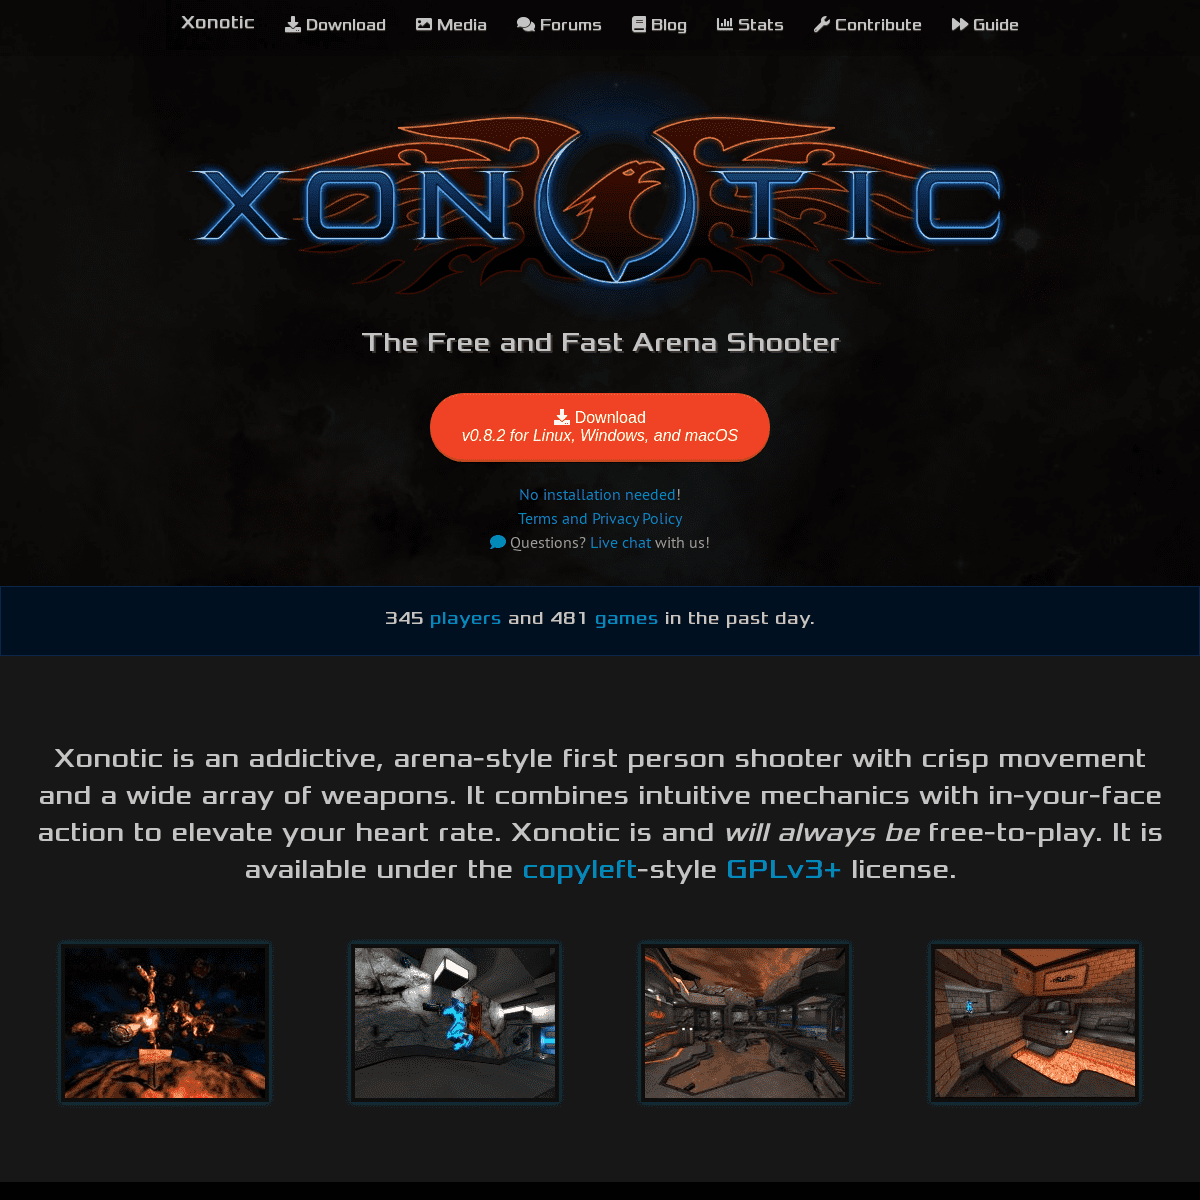 A complete backup of https://xonotic.org